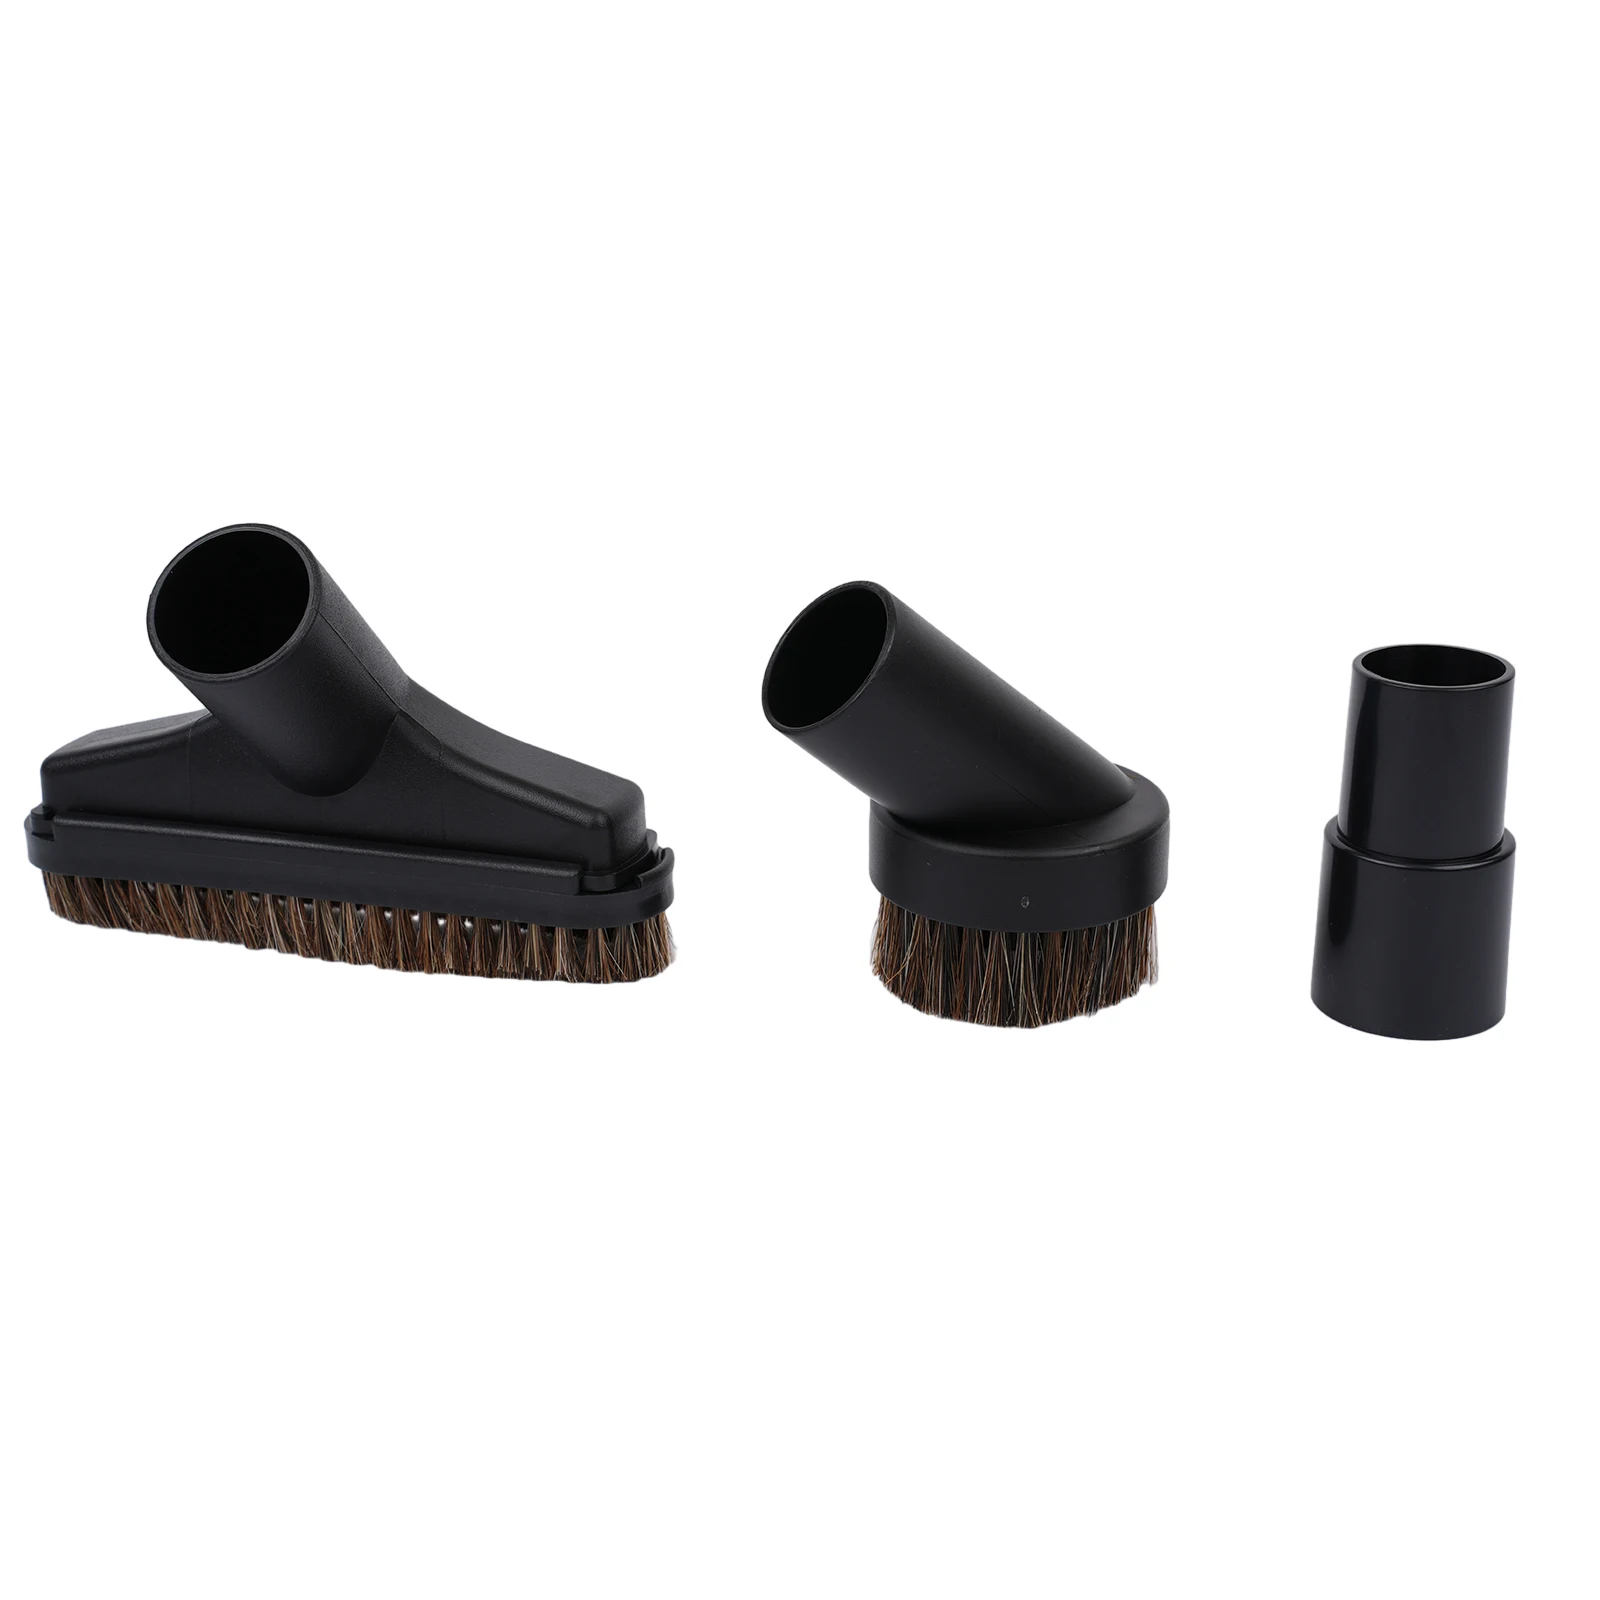 

Multi functional Vacuum Cleaner Brush Head Nozzle Replacement Parts with Adapter Perfect for Various Cleaning Needs